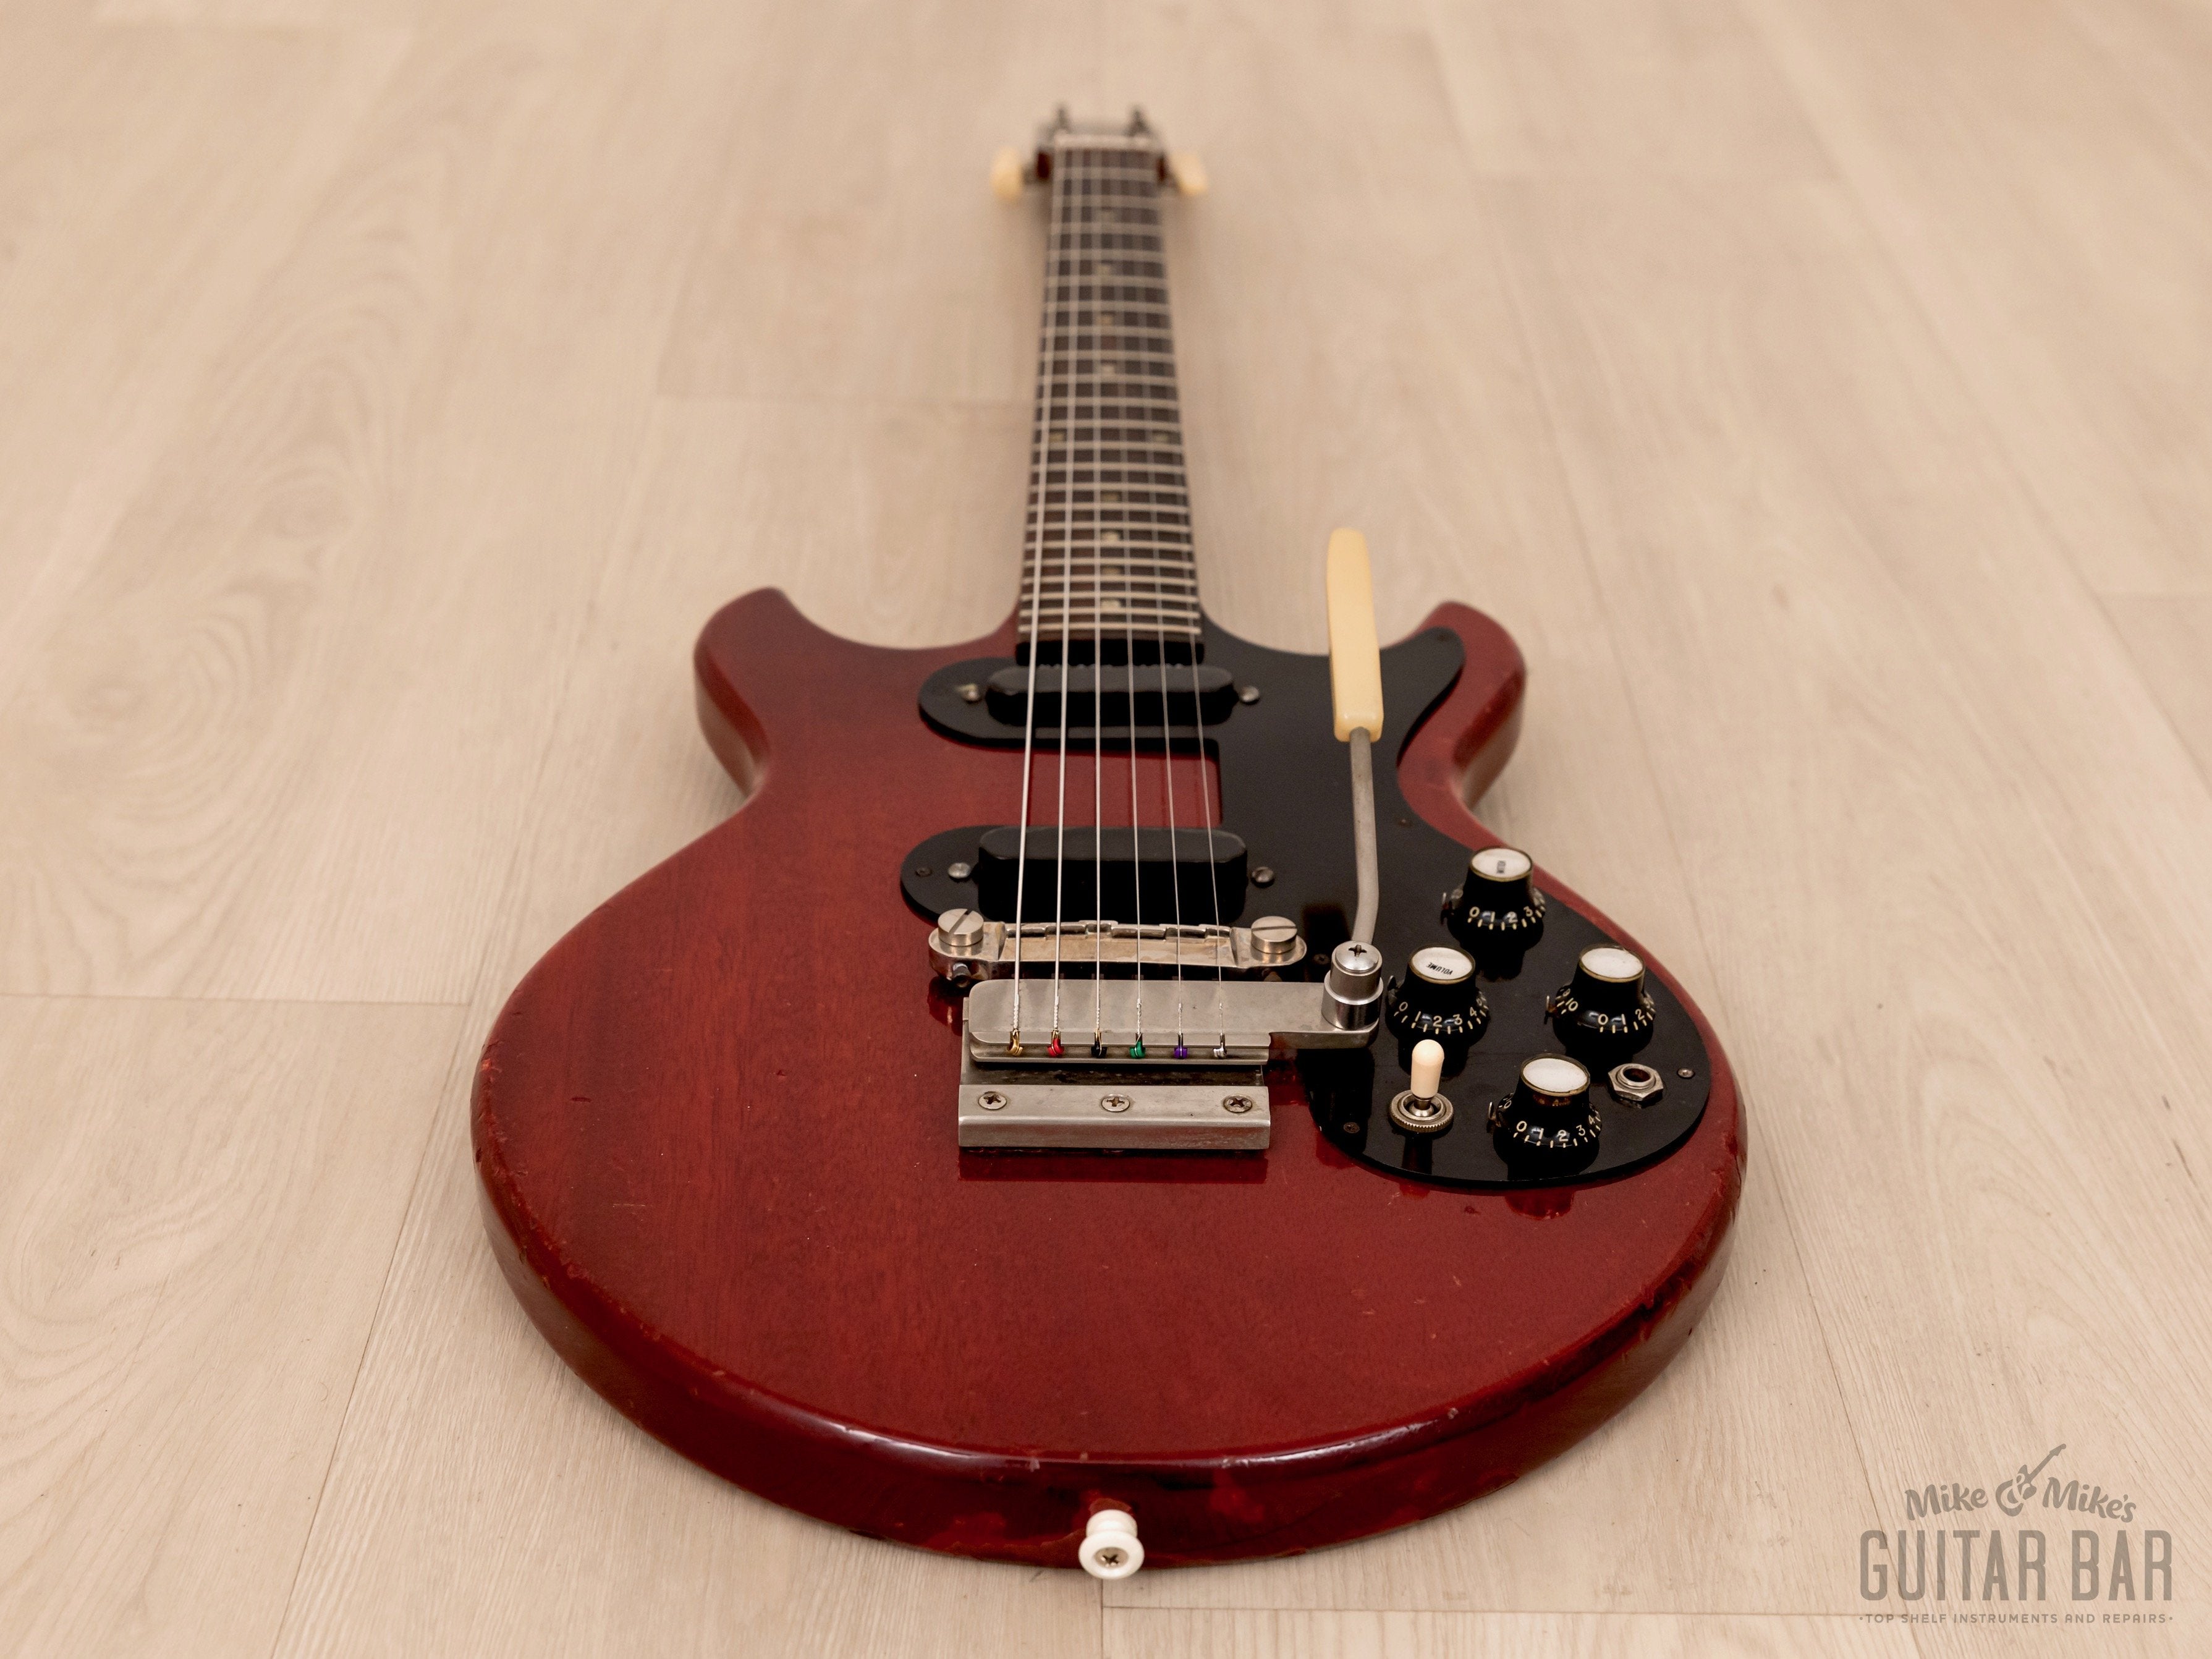 1965 Gibson Melody Maker D Double Vintage Electric Guitar Cherry w/ Vibrola, Case